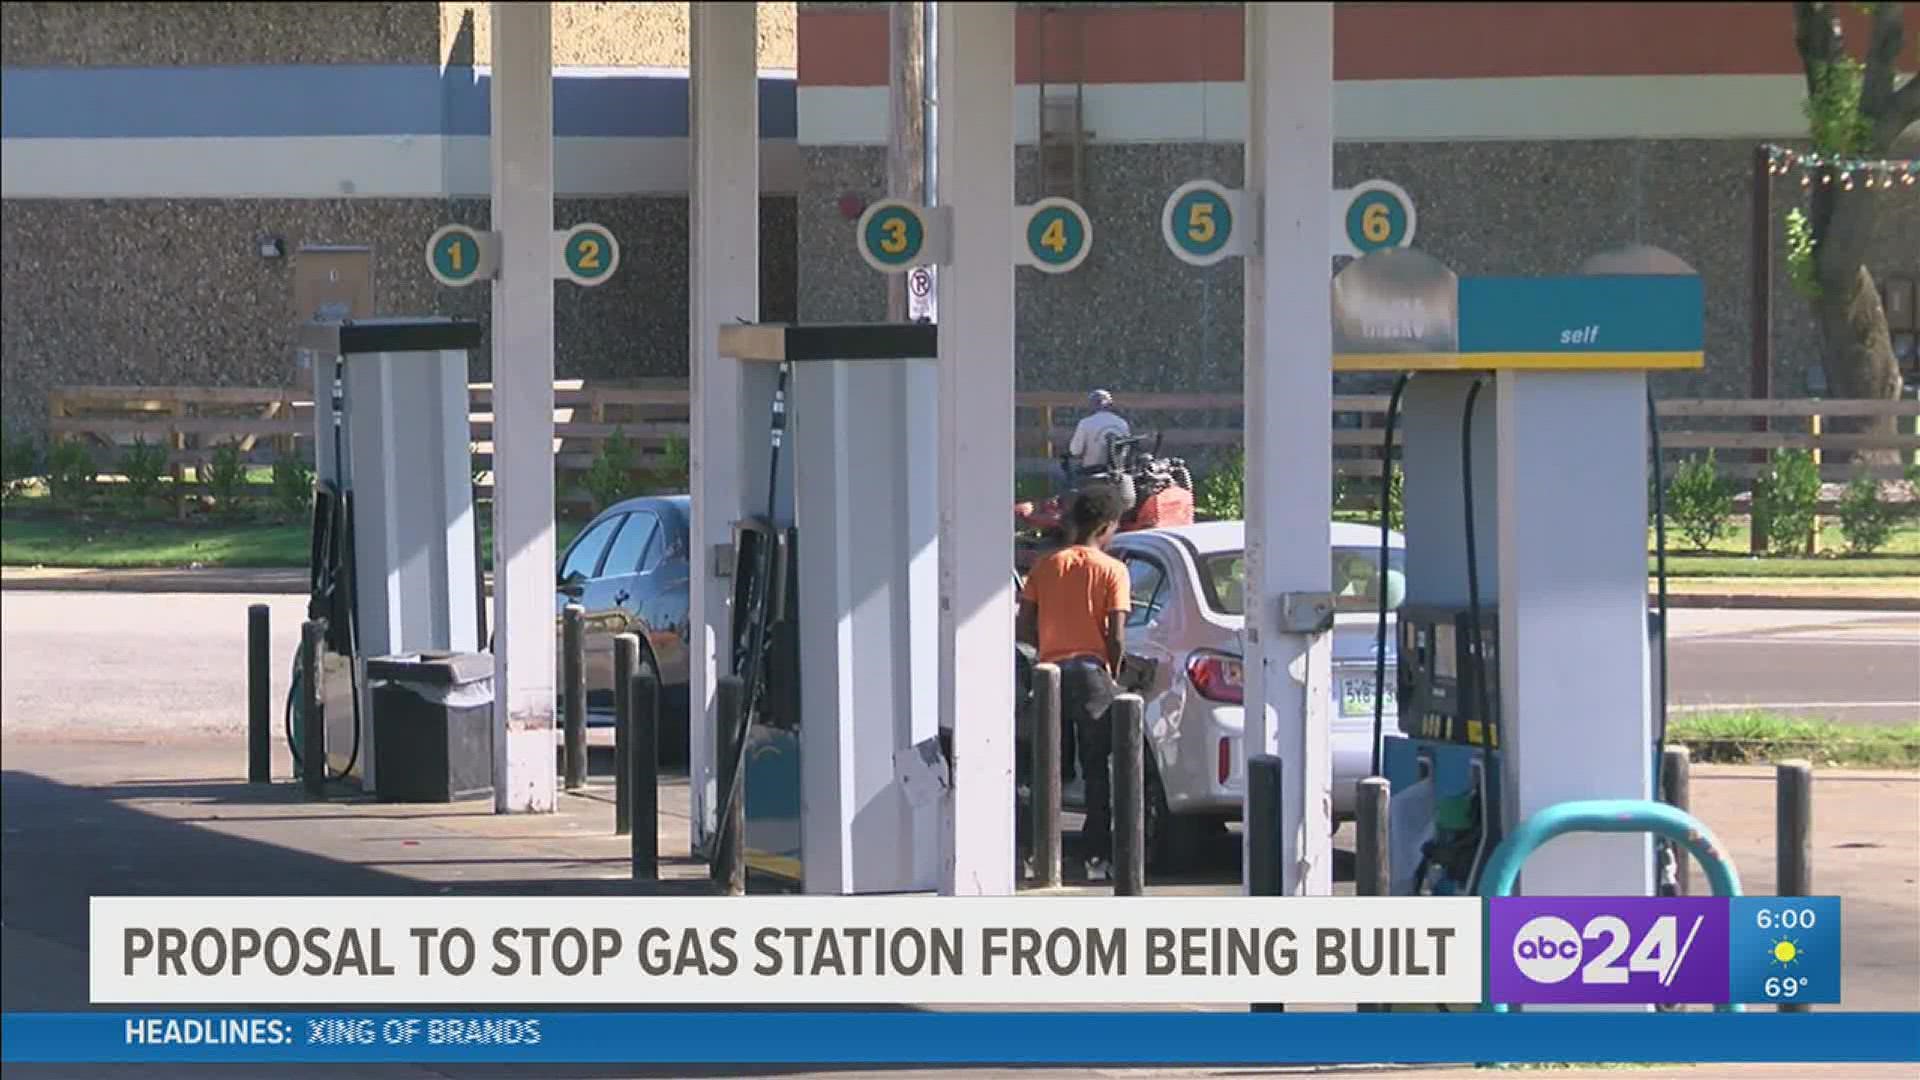 Memphis has the second highest number of gas stations per capita in Tennessee, just behind Millington.